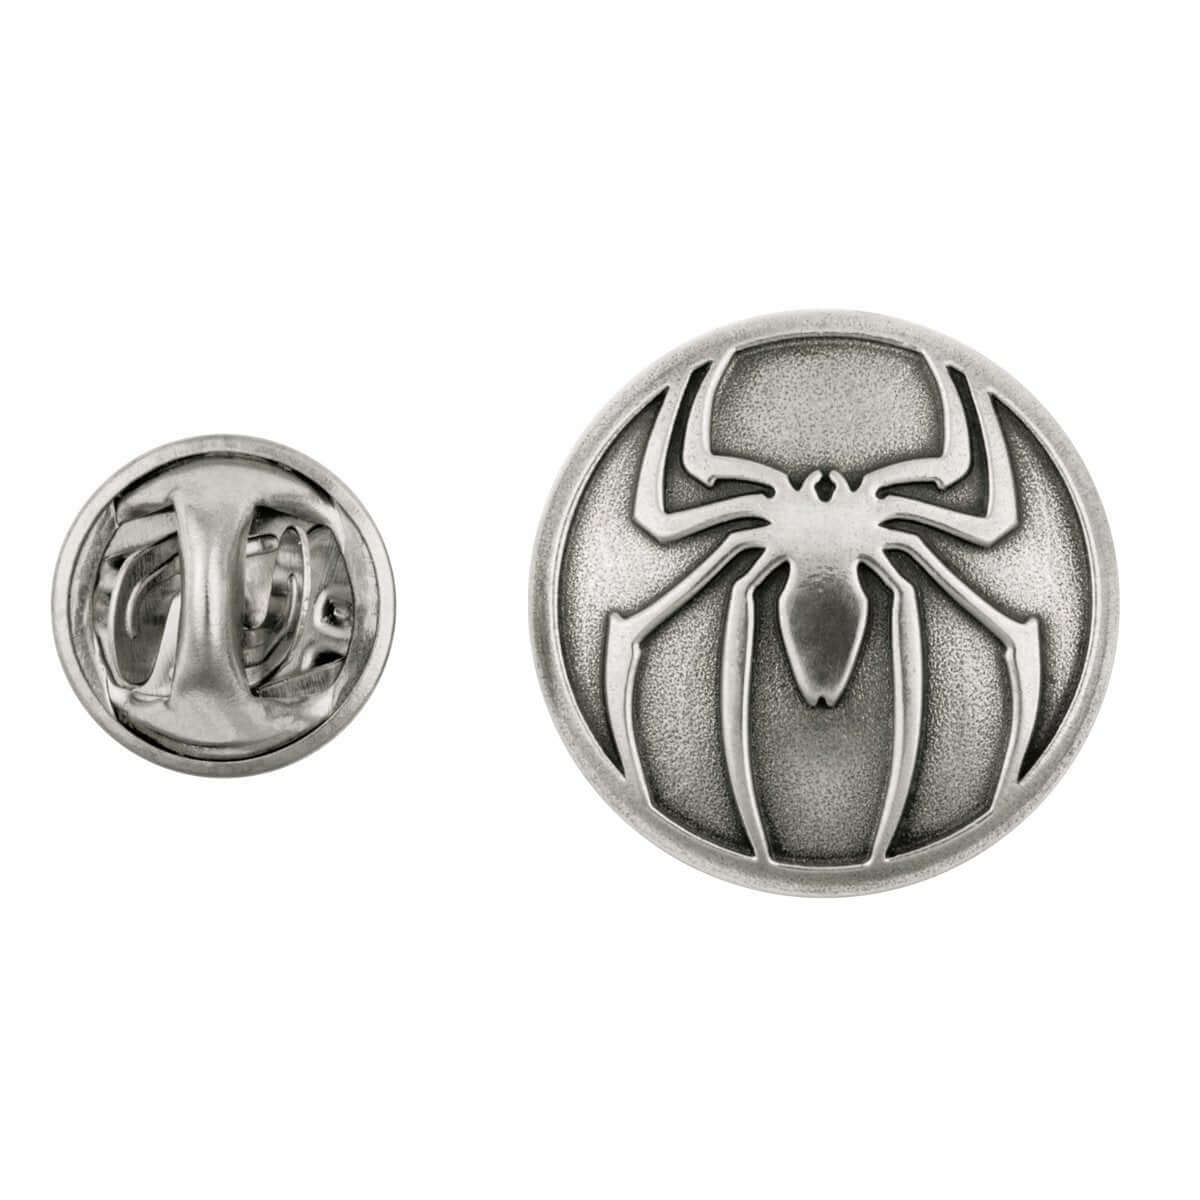 Spider-Man Lapel Pin - Marvel Collectible gift